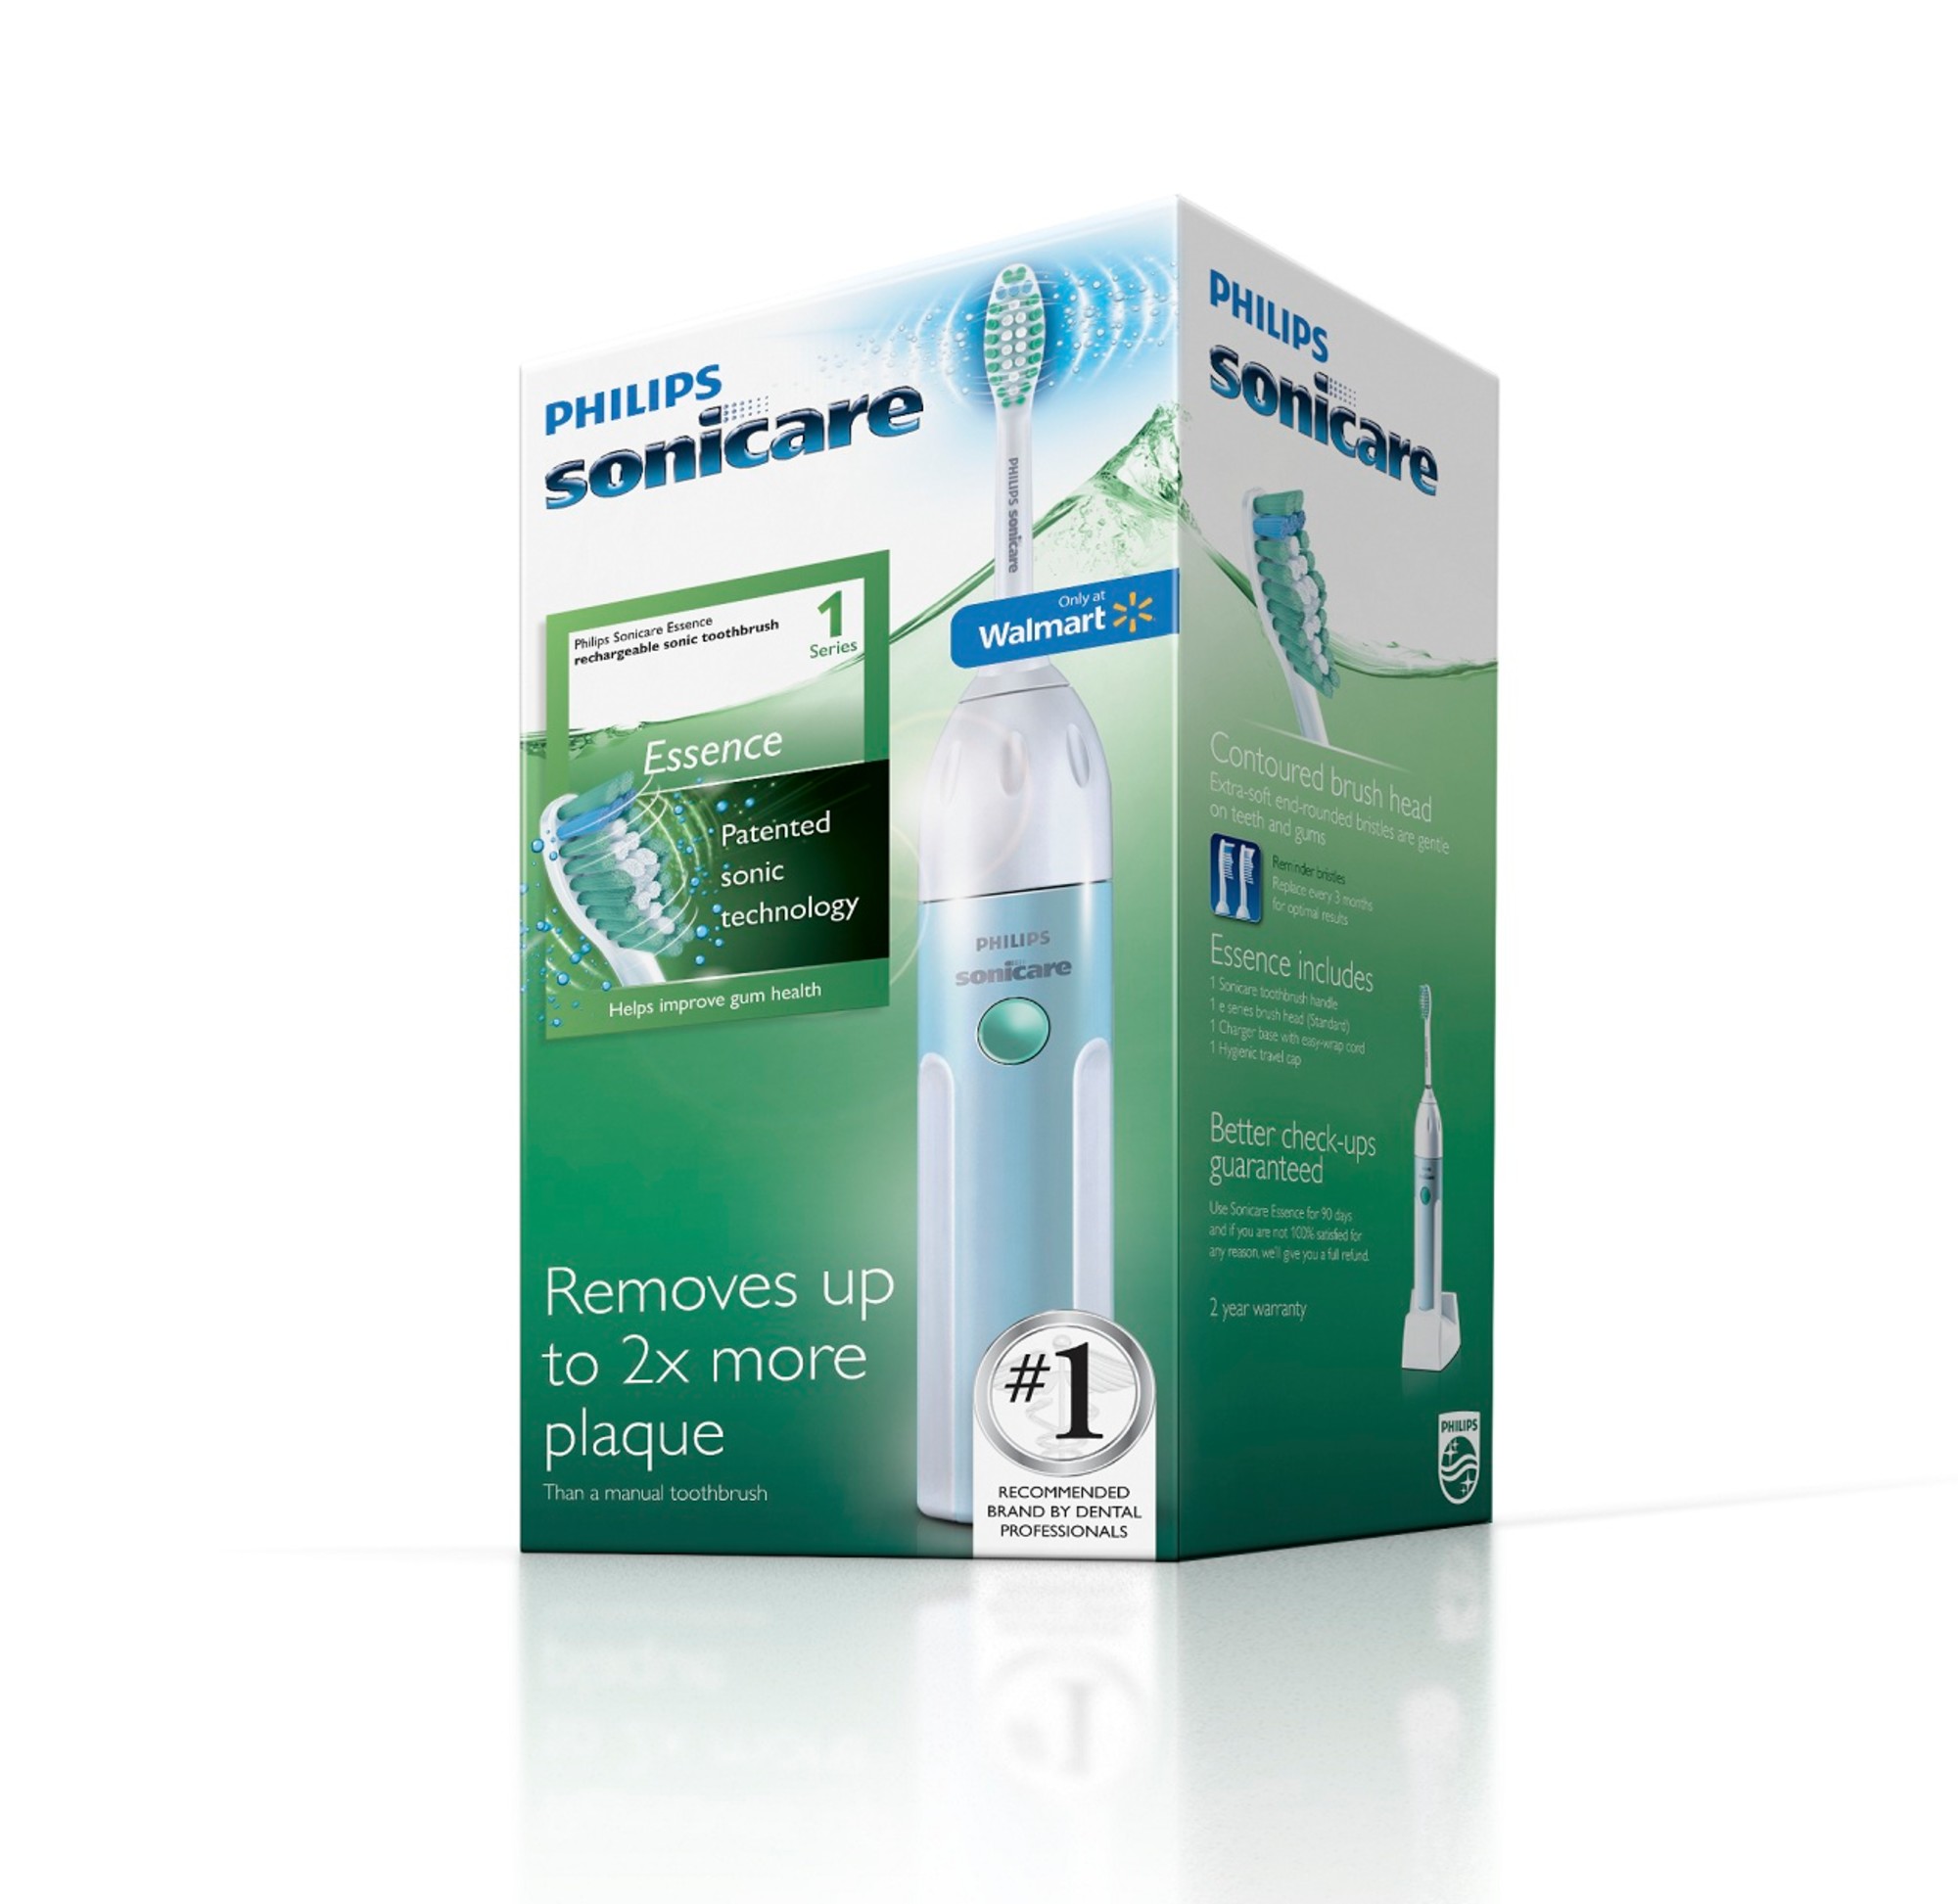 Philips Sonicare Essence Electric Rechargeable Toothbrush - image 2 of 2